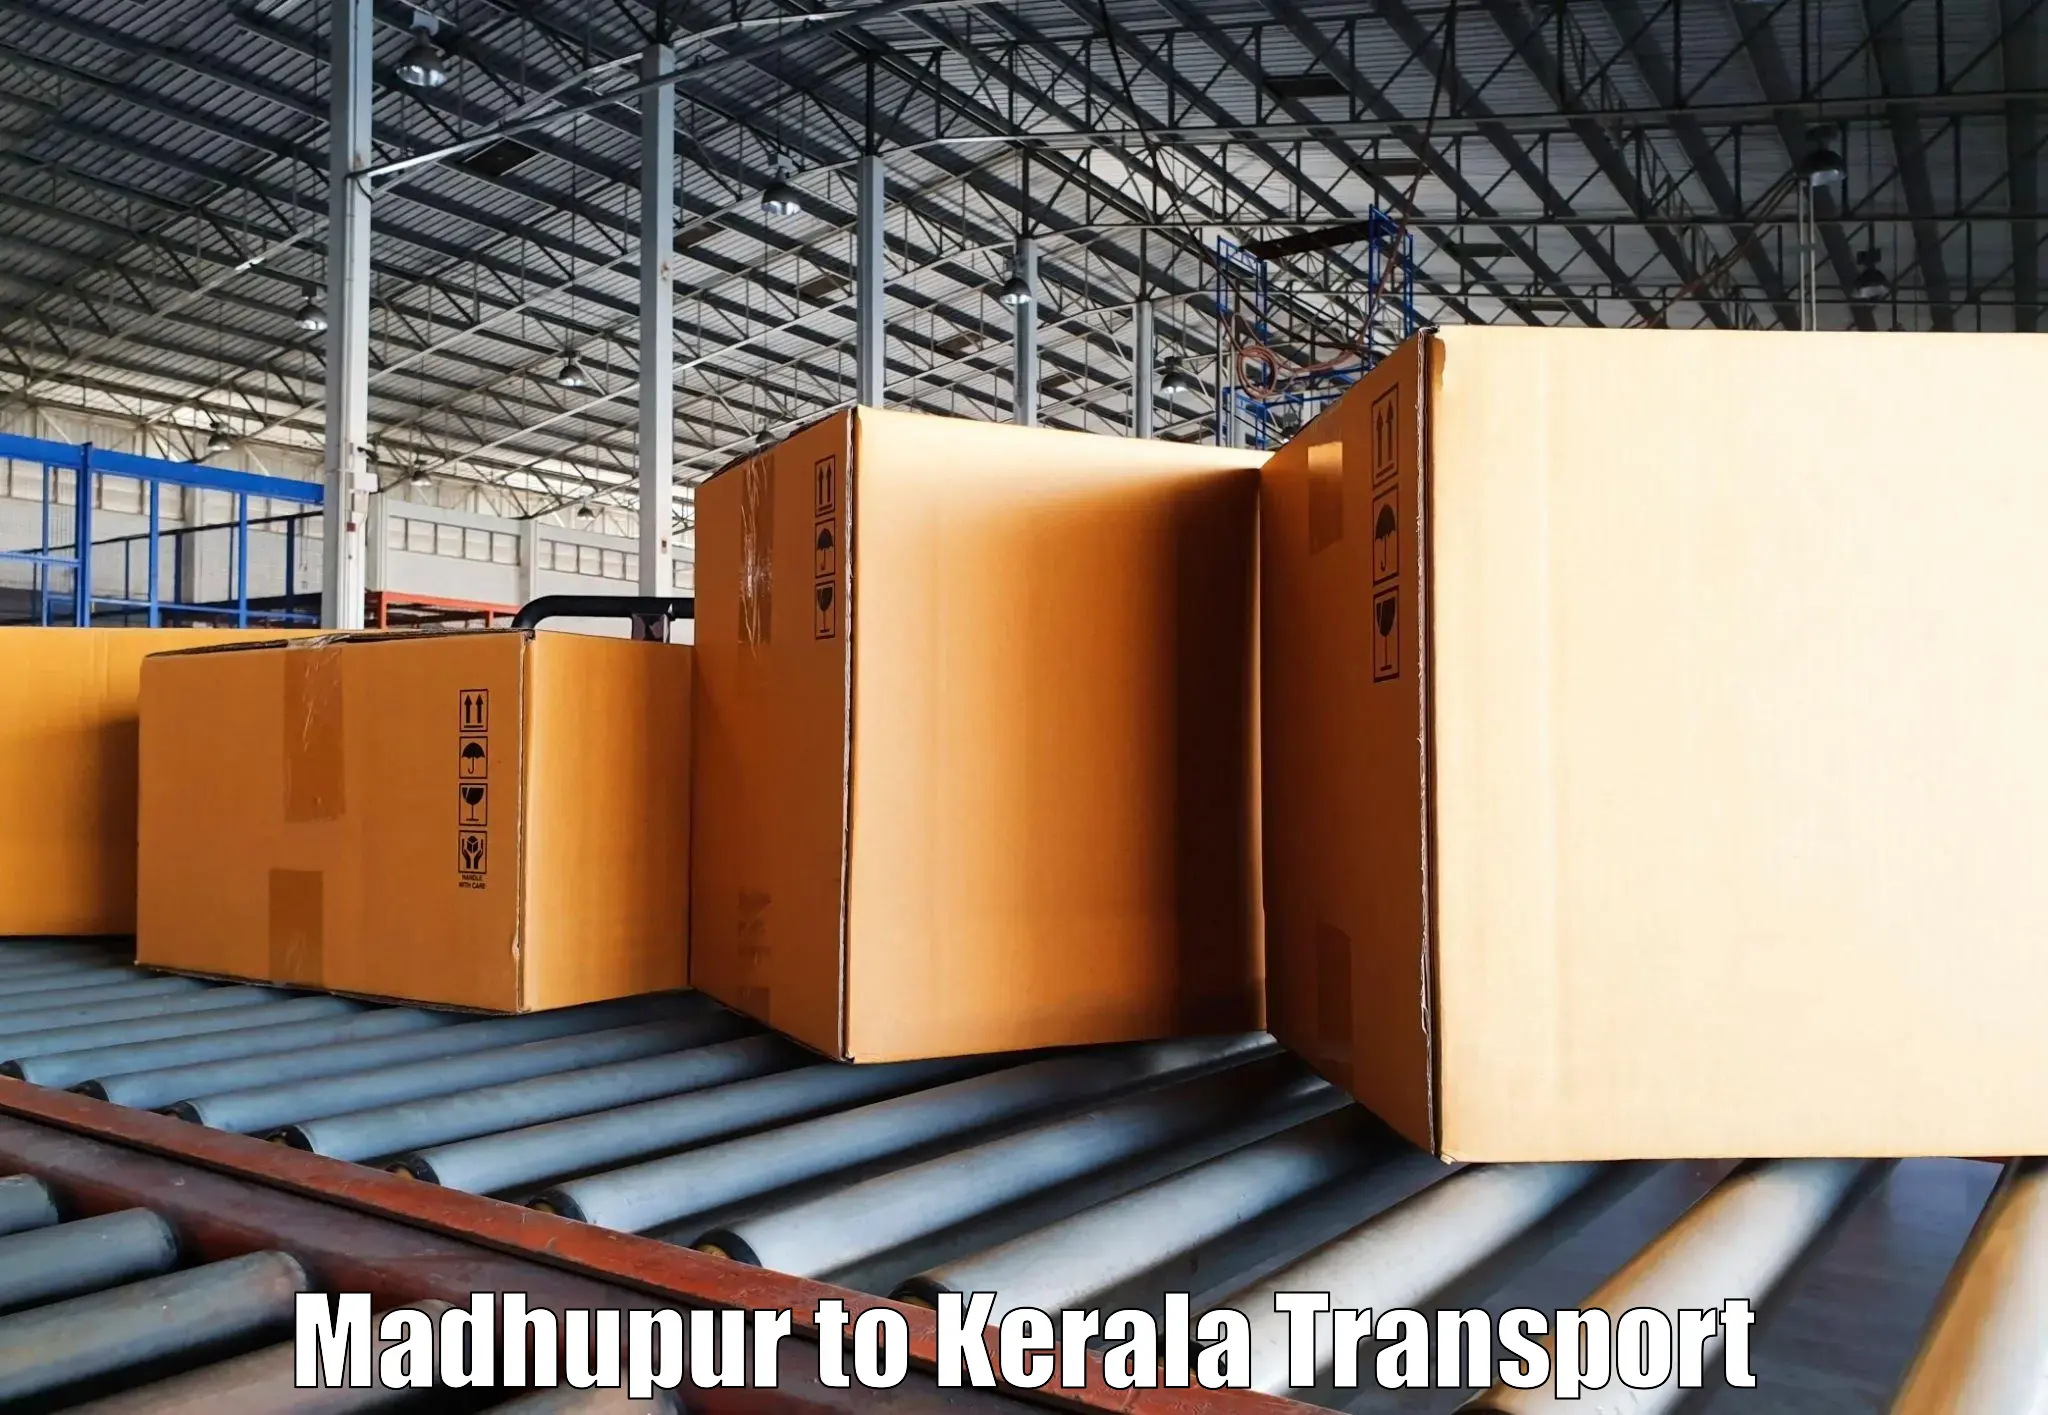 Express transport services in Madhupur to Mahe